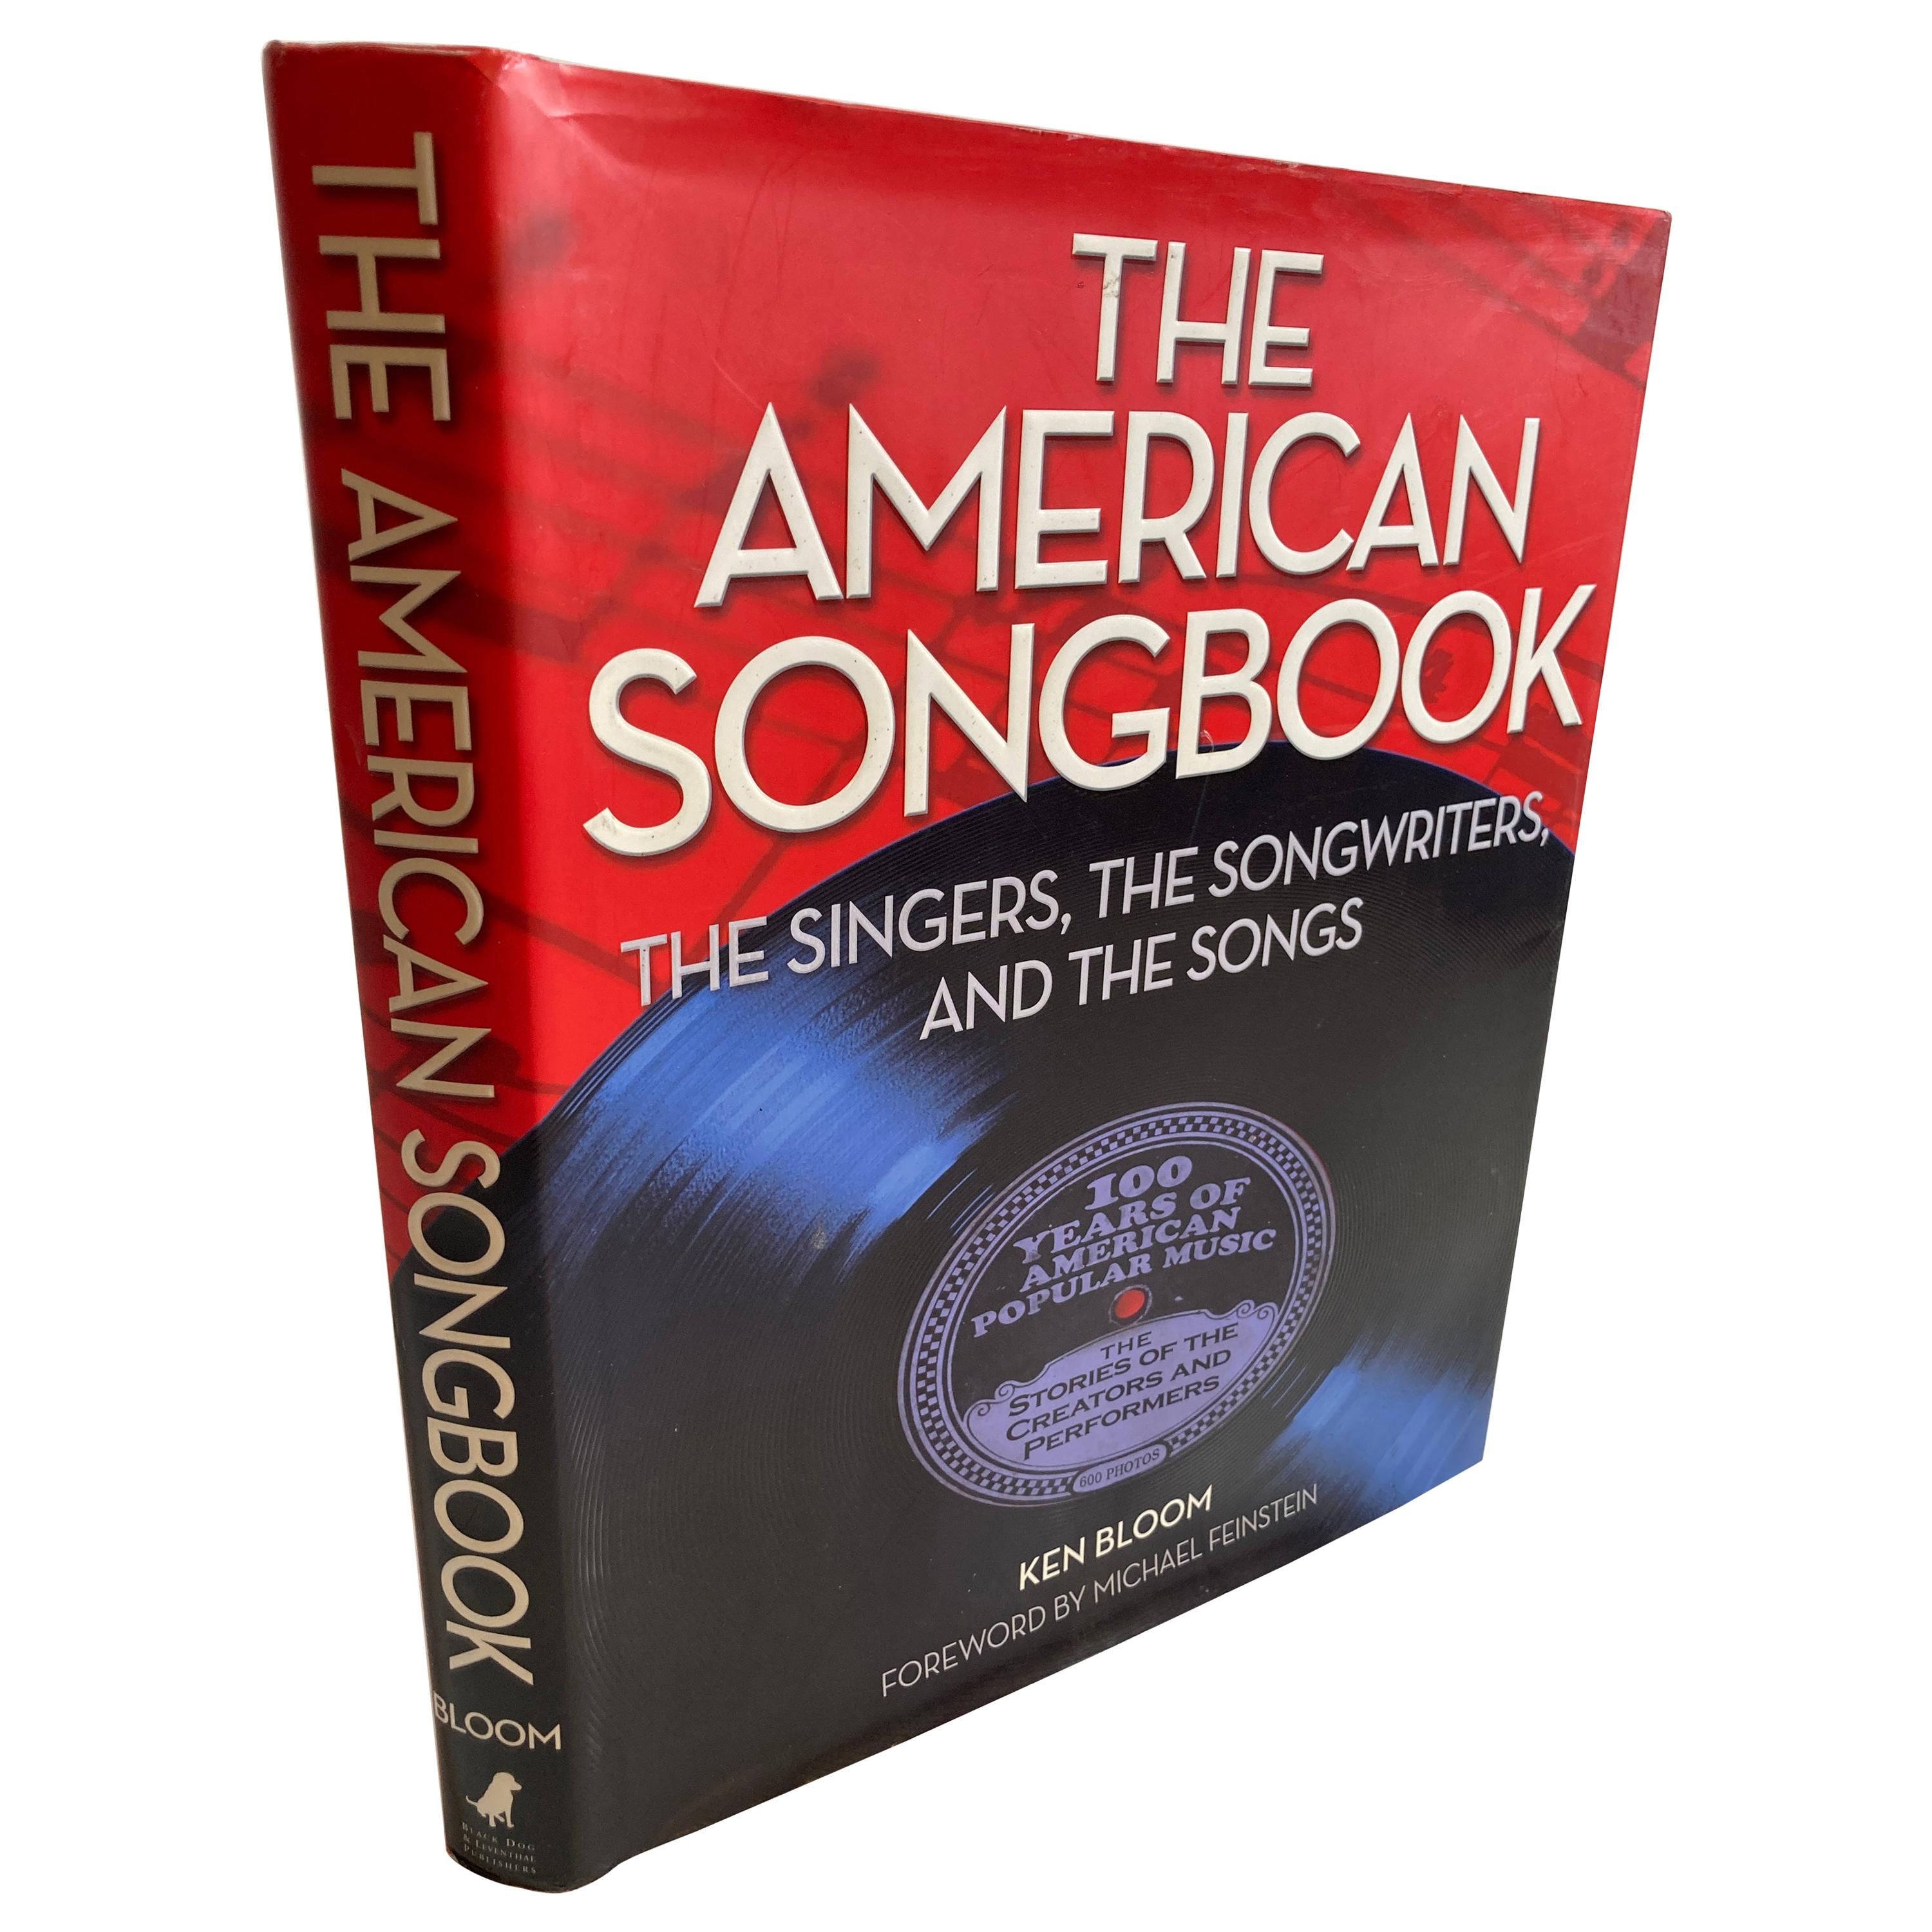 "The American Songbook The Singers, Songwriters and The Songs" by Ken Bloom Book